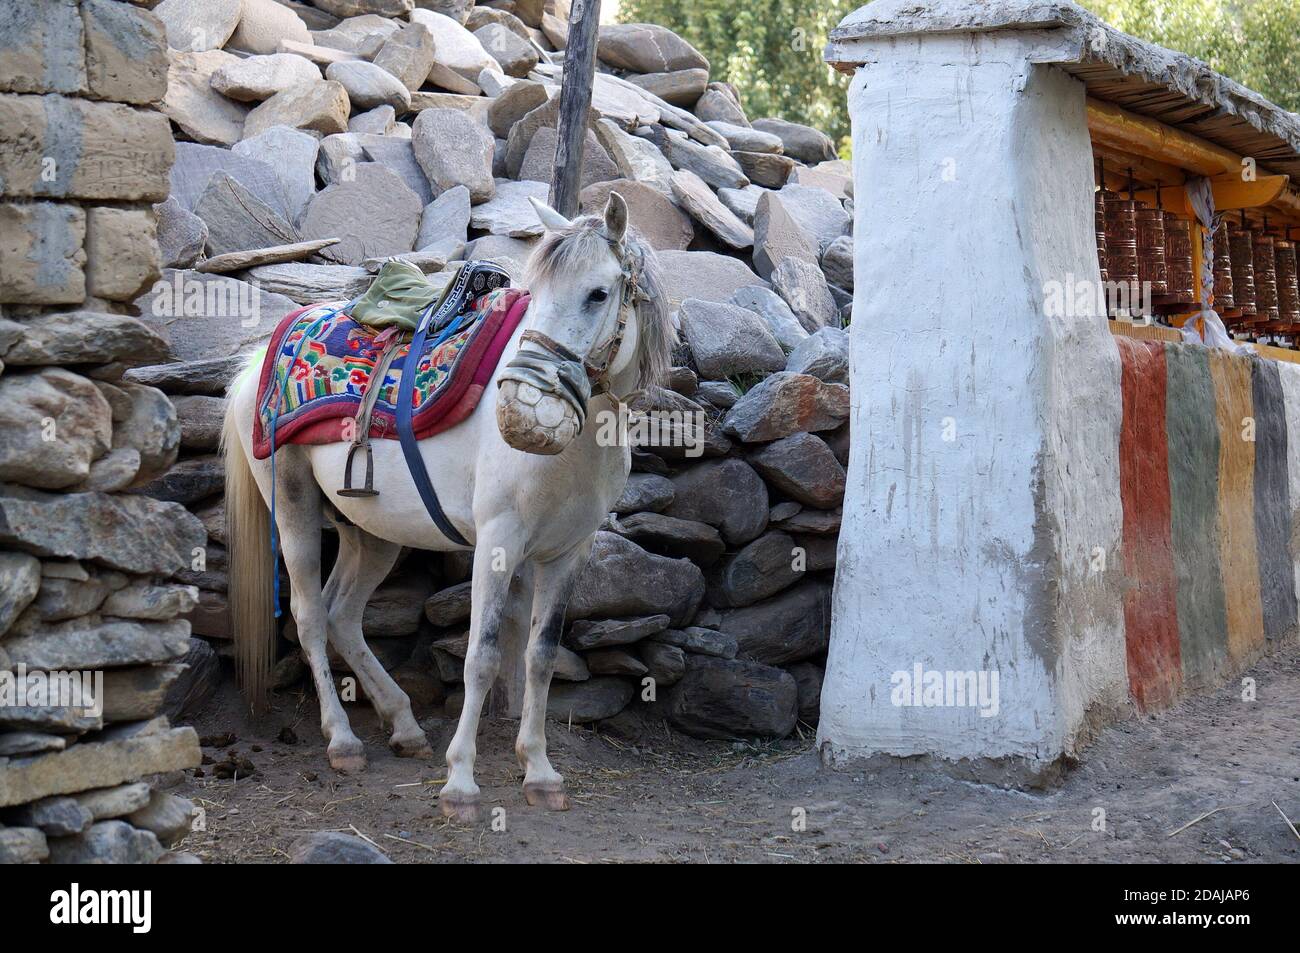 A harnessed riding horse in a leather protective muzzle from mosquito bites, stands in the yard. Upper Mustang. Nepal. Stock Photo